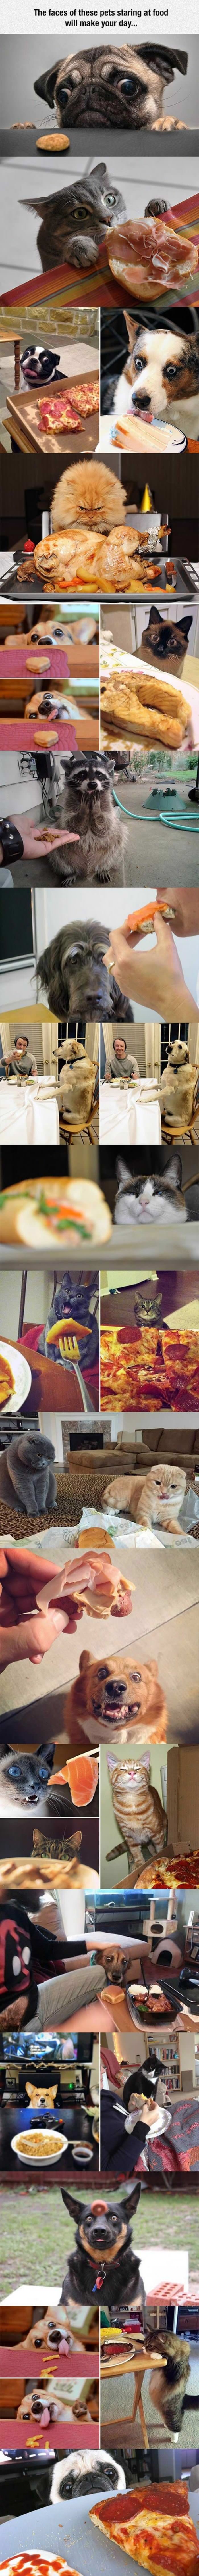 faces of pets looking at food funny picture